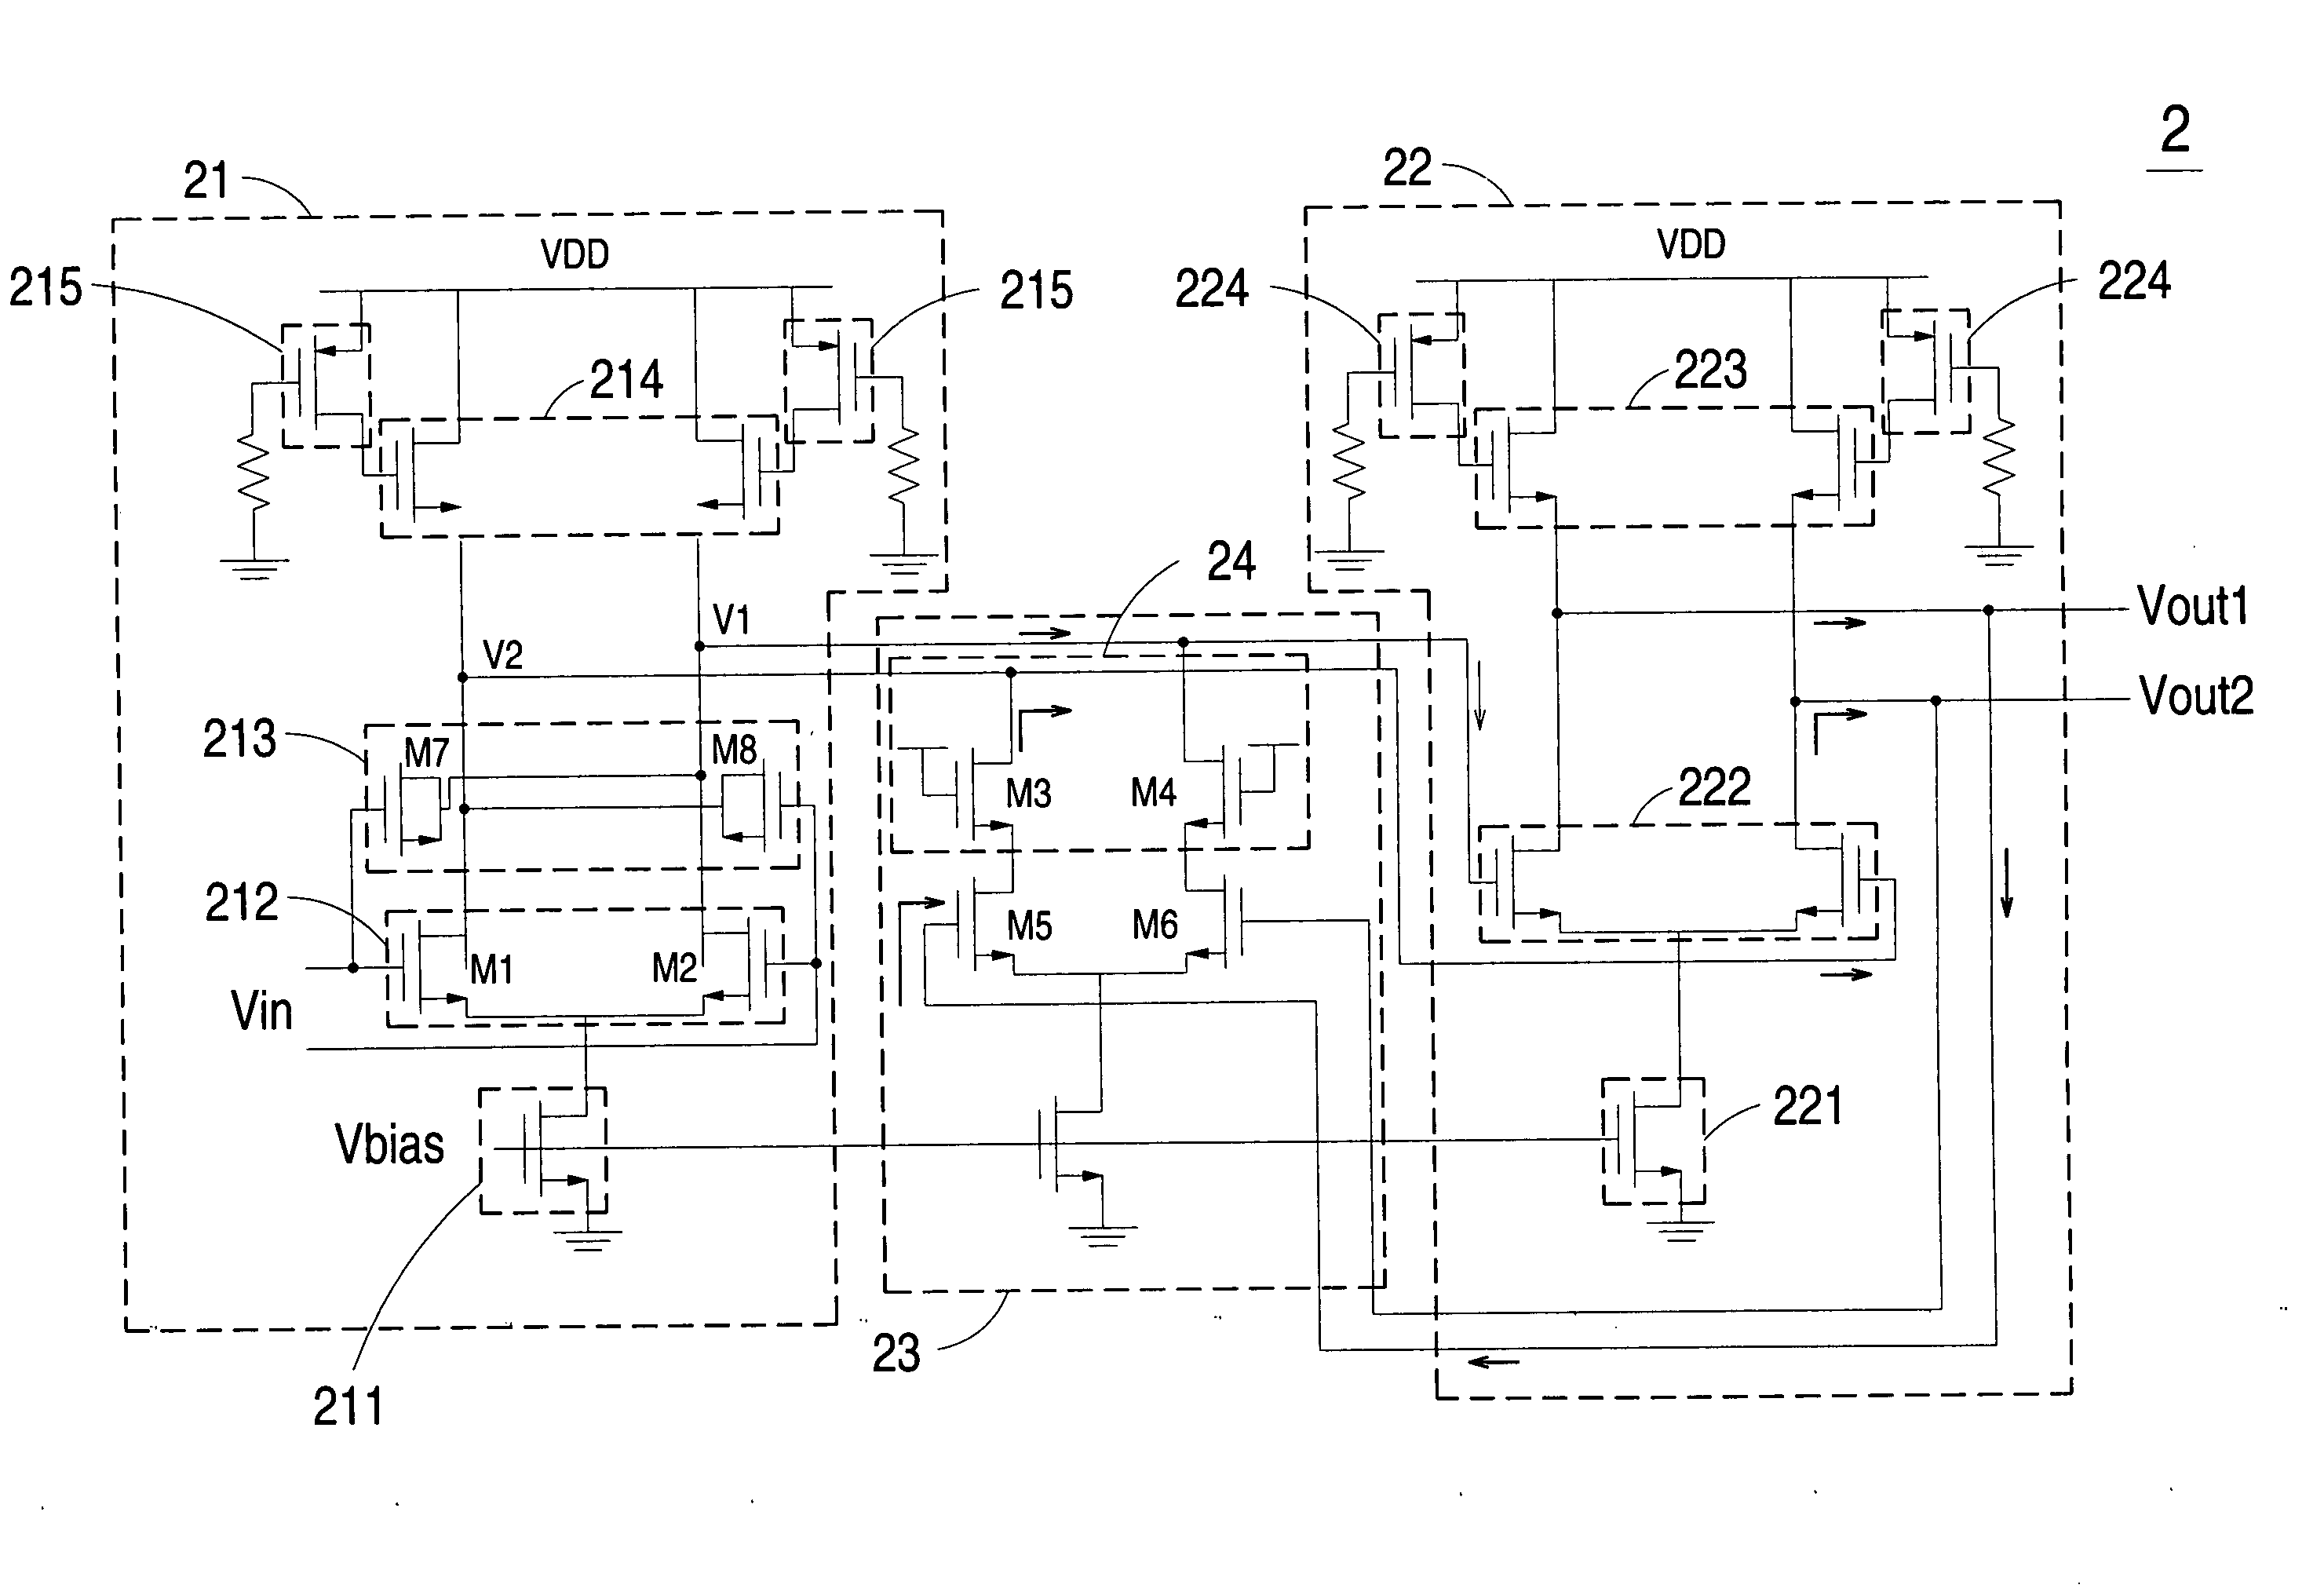 Transmission circuit for use in input/output interface